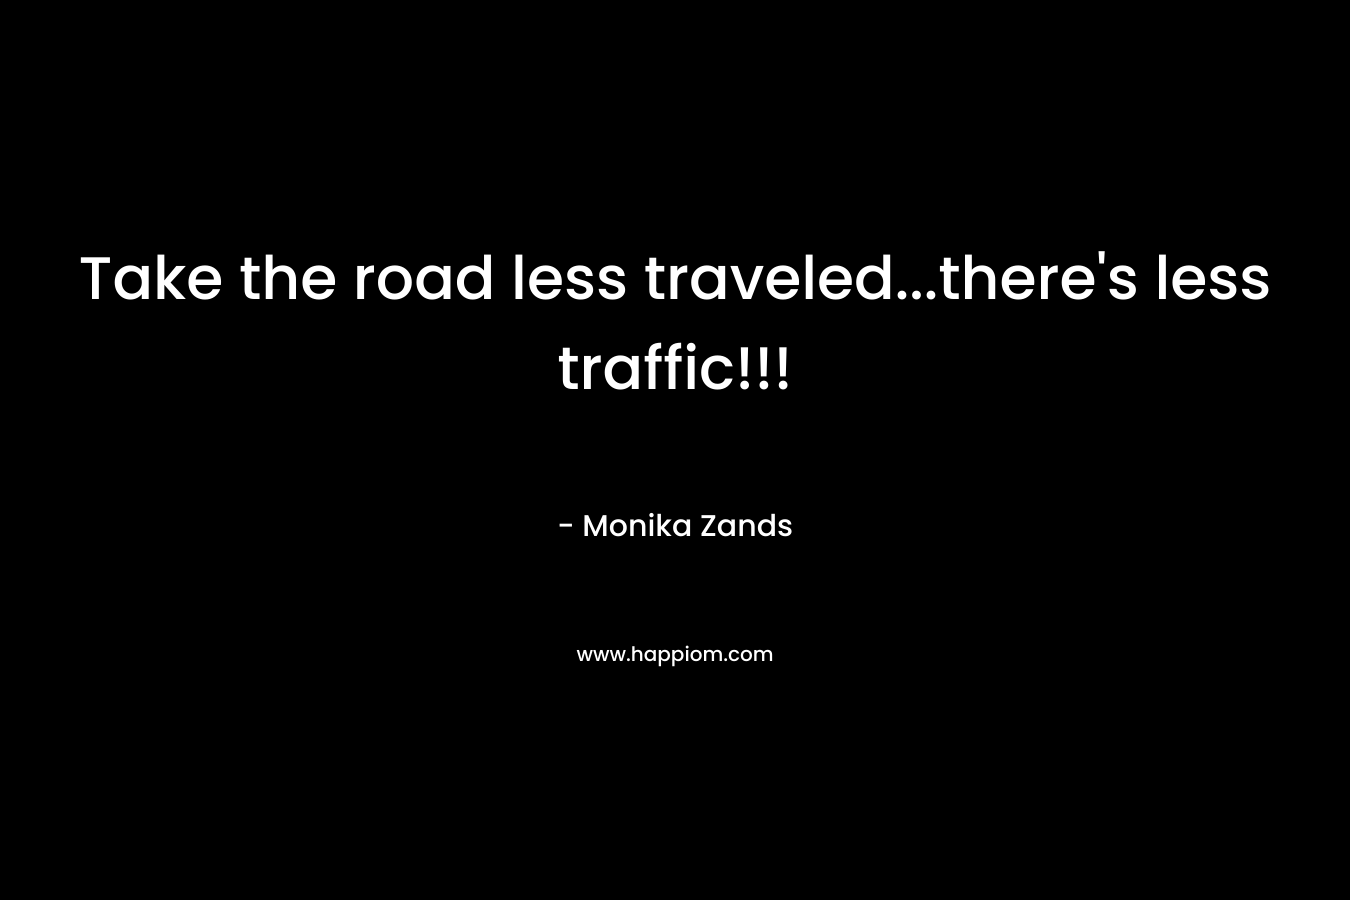 Take the road less traveled...there's less traffic!!!